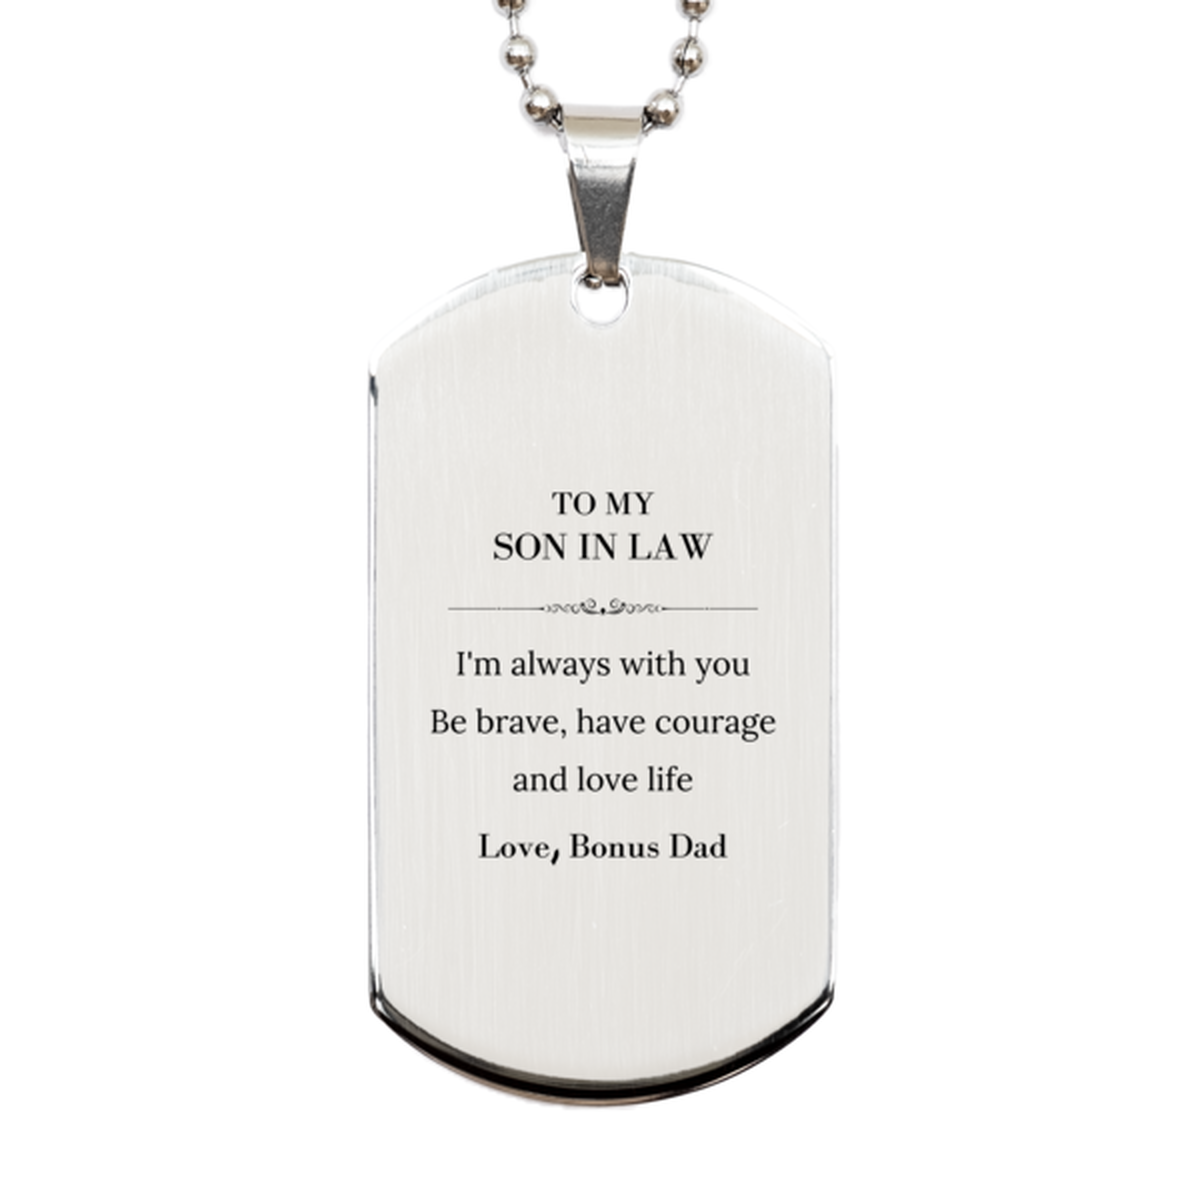 To My Son In Law Gifts from Bonus Dad, Unique Silver Dog Tag Inspirational Christmas Birthday Graduation Gifts for Son In Law I'm always with you. Be brave, have courage and love life. Love, Bonus Dad